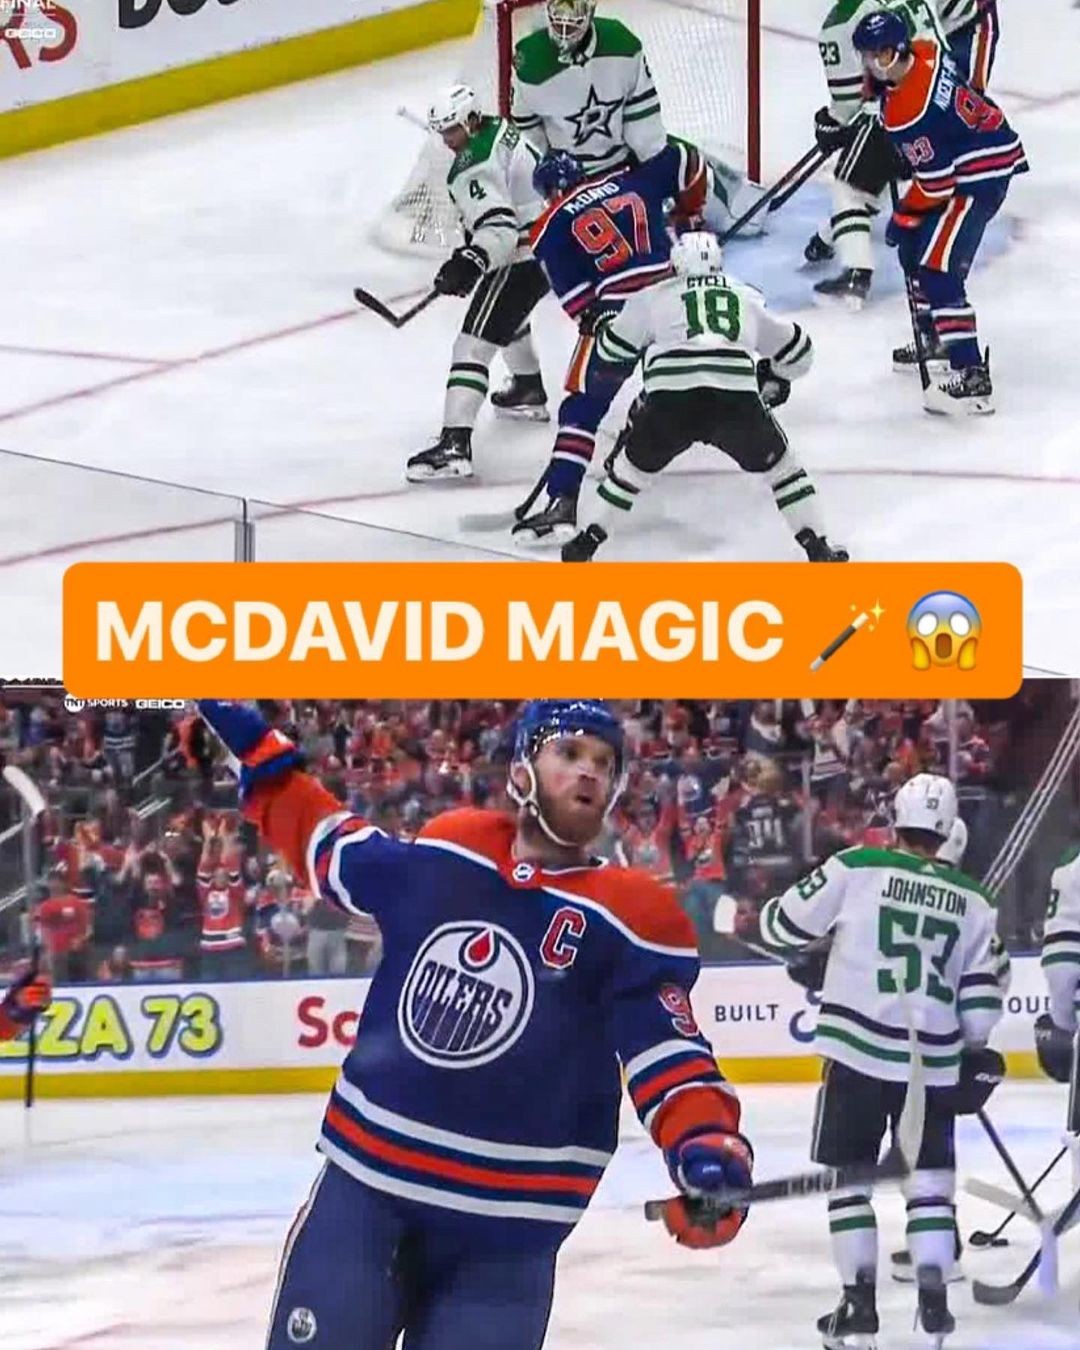 THAT IS RIDICULOUS CONNOR MCDAVID ??